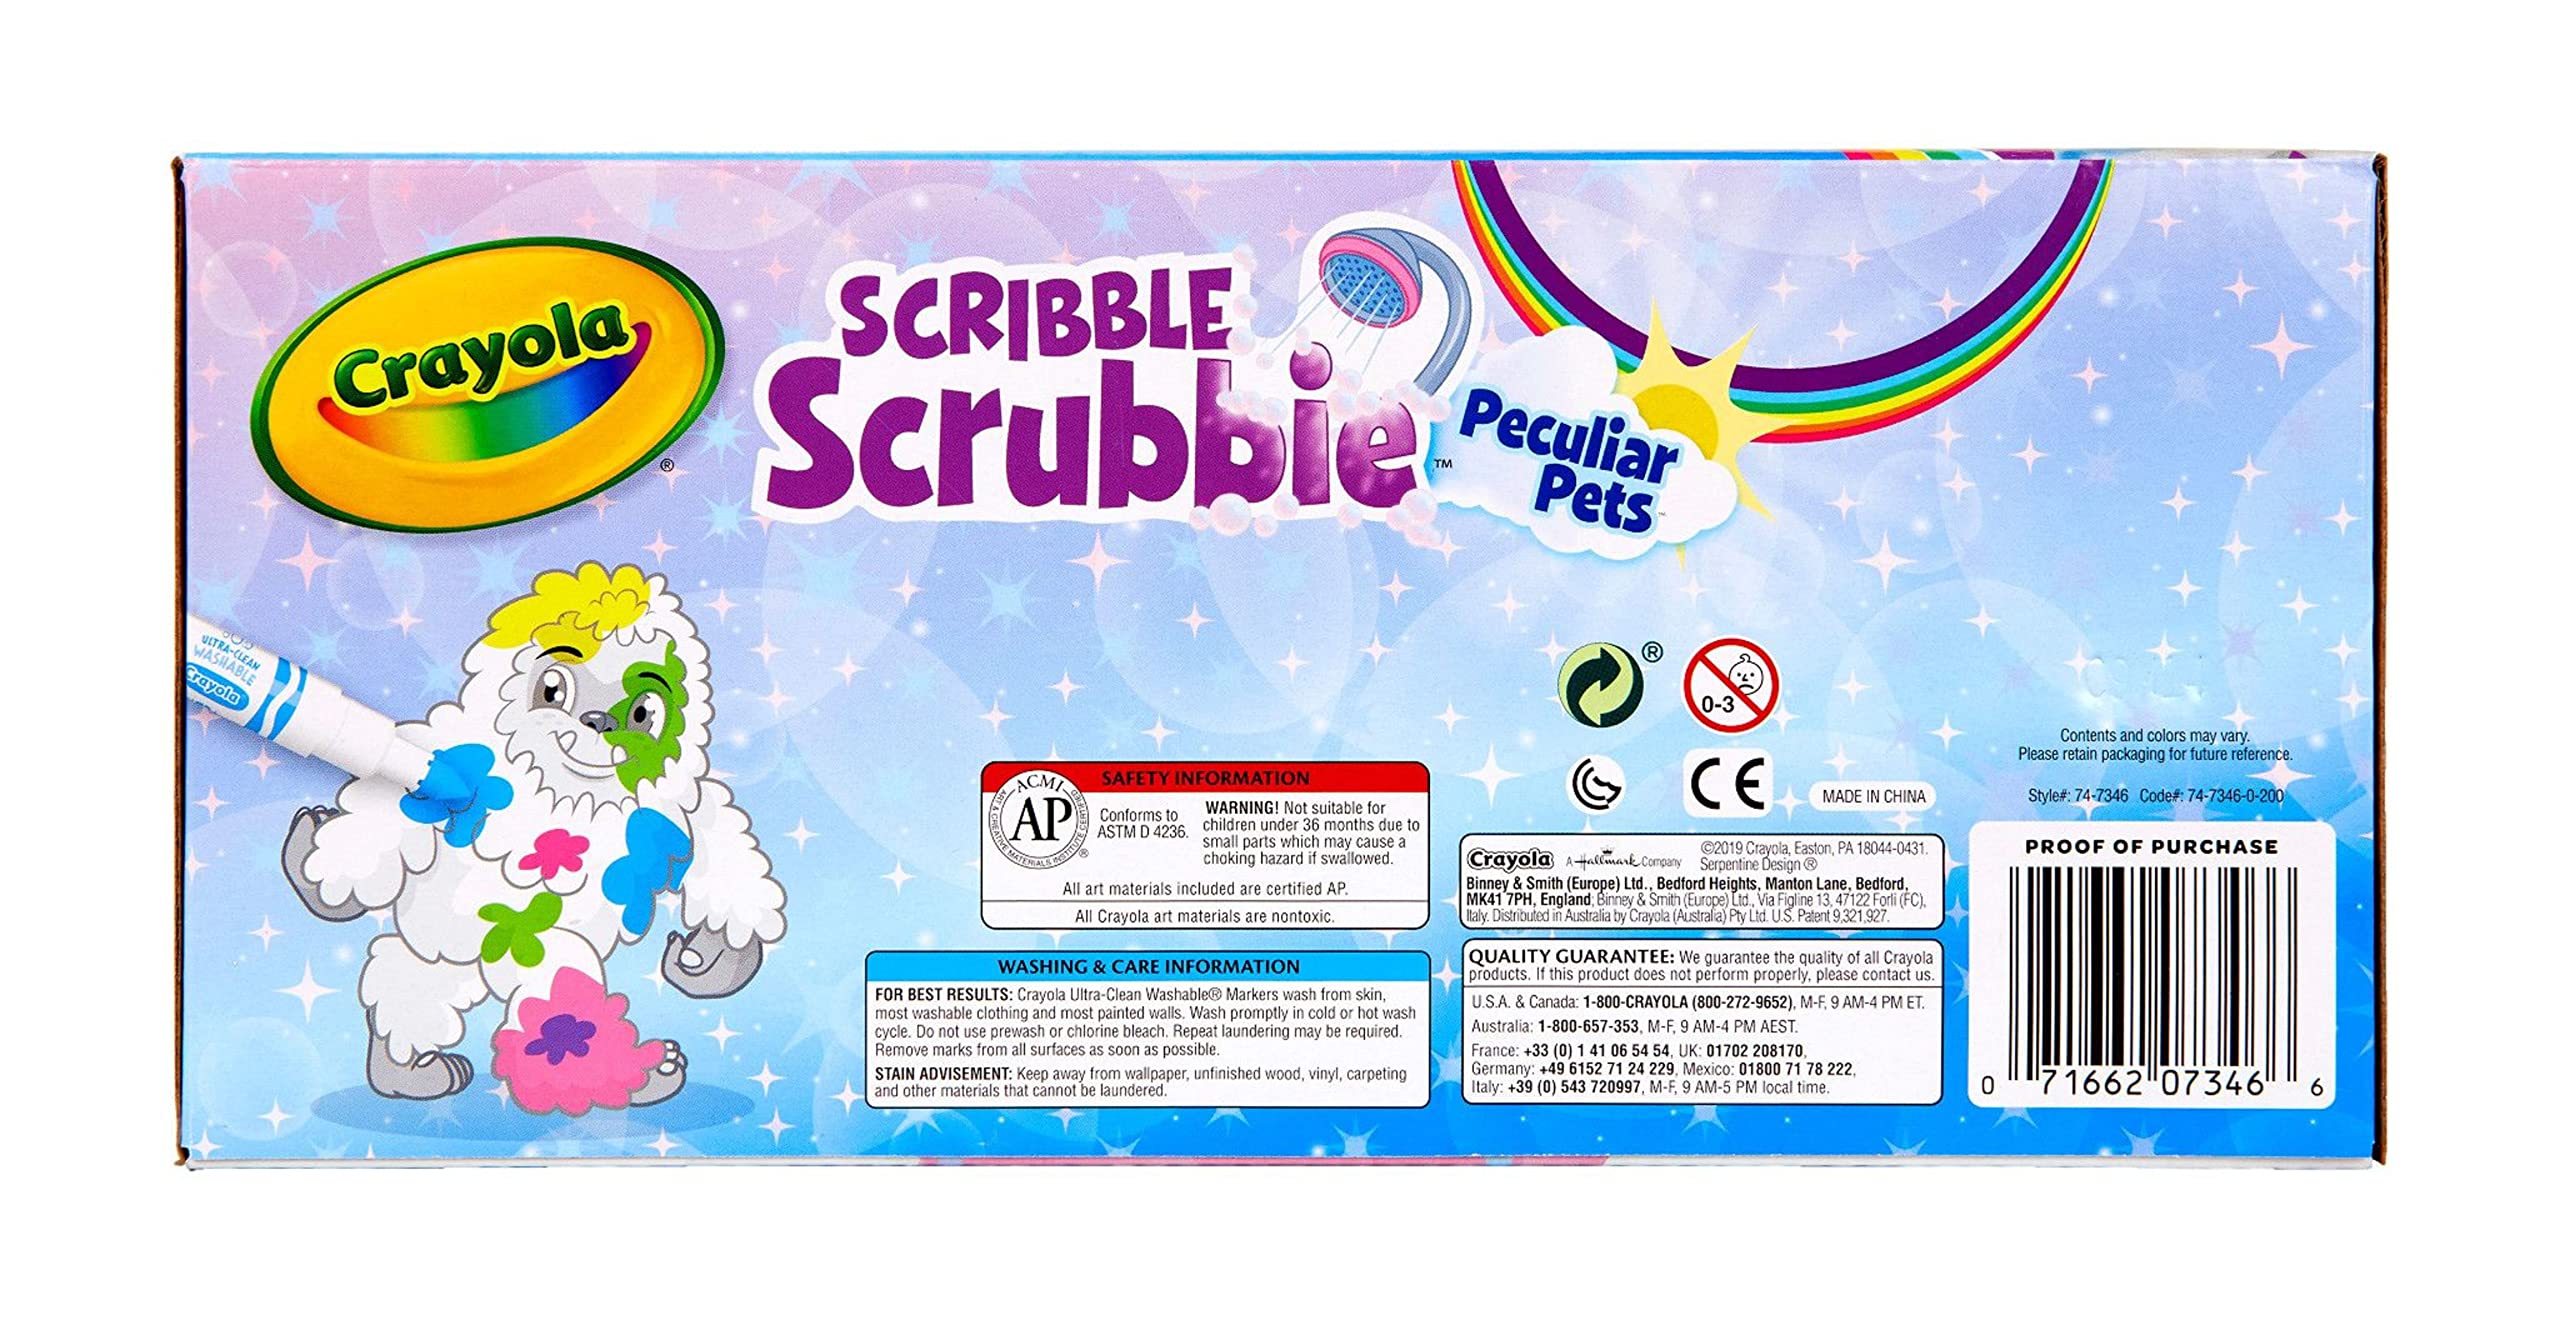 Crayola Scribble Scrubbie Peculiar Pets, Pet Care Toy, Includes Working Tub & Washable Markers, Gifts for Kids, Ages 3+ [Amazon Exclusive]